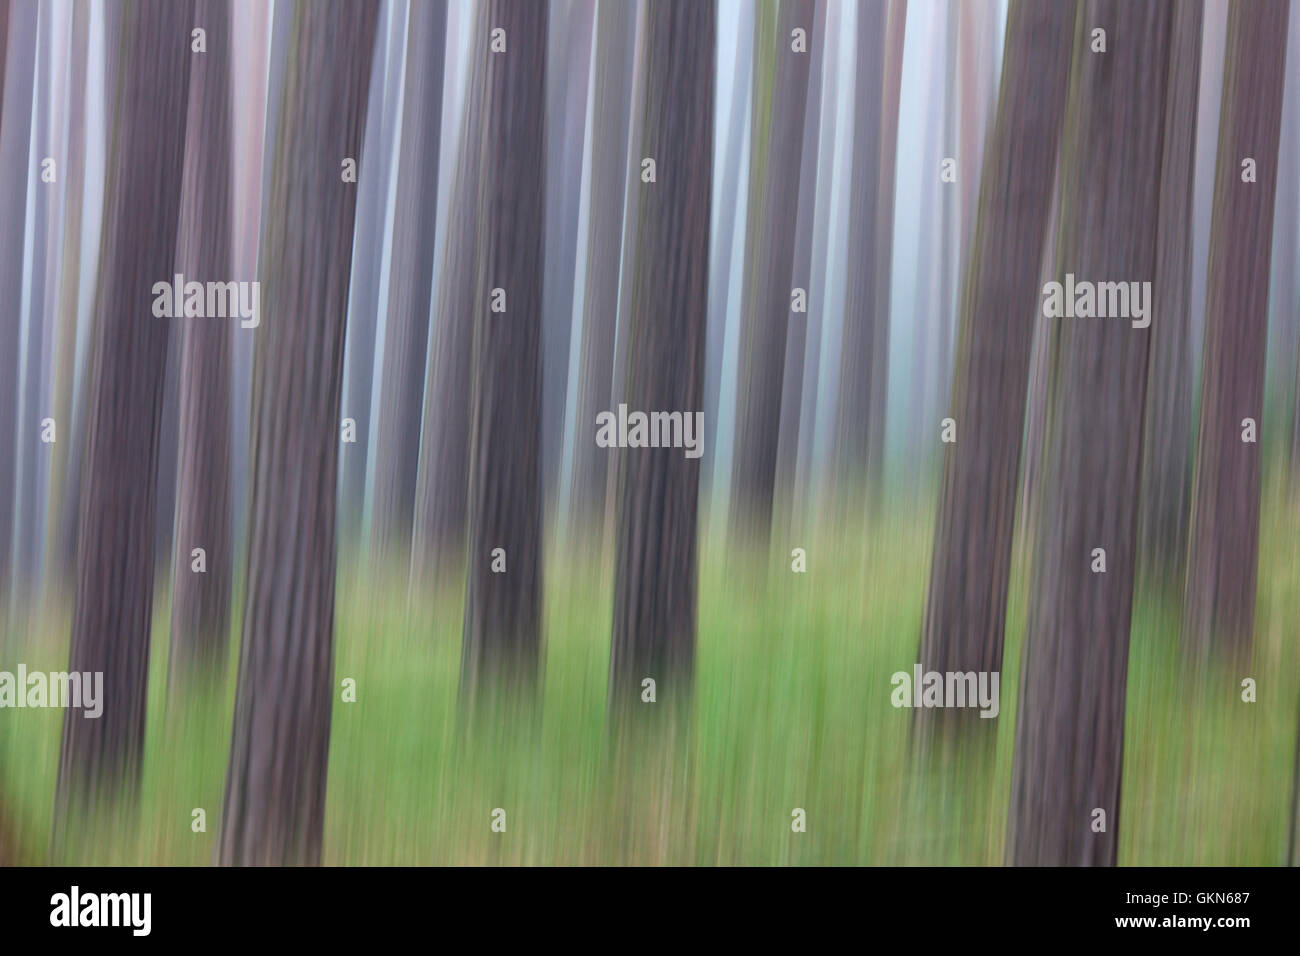 Abstract image of motion blurred Scots Pine (Pinus sylvestris) tree trunks in coniferous forest in the mist Stock Photo